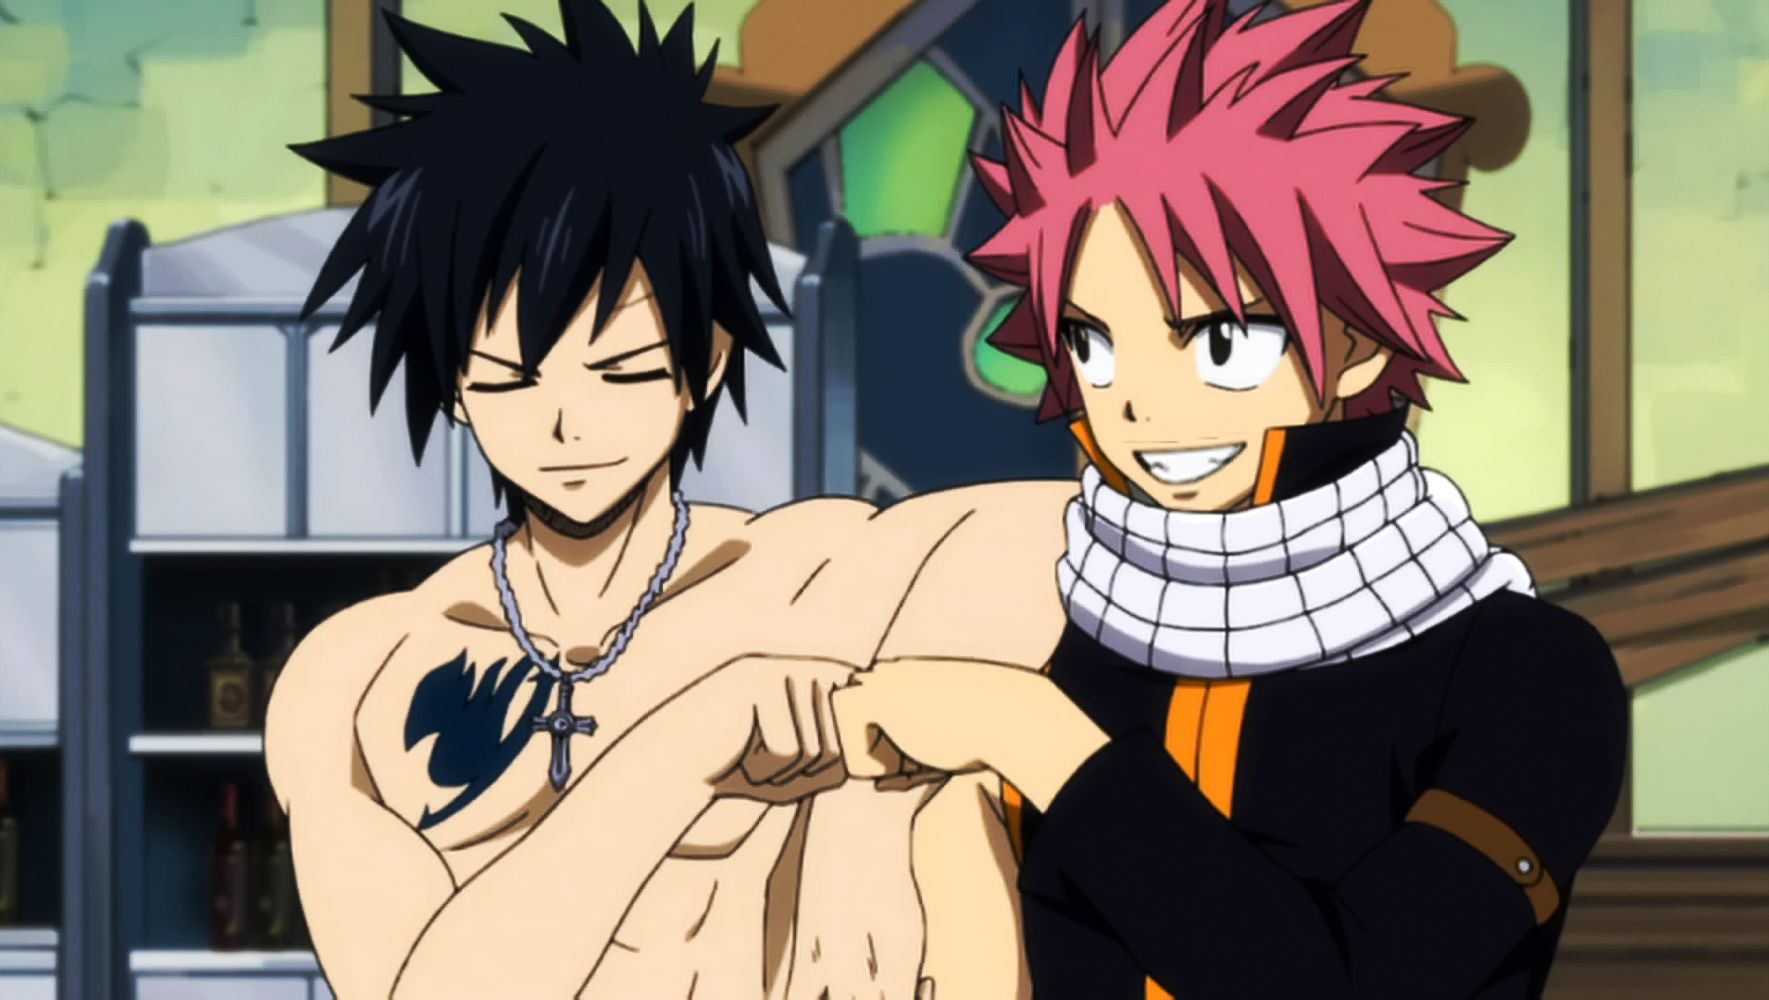 Natsu Dragneel Relationships. Fairy Tail Couples